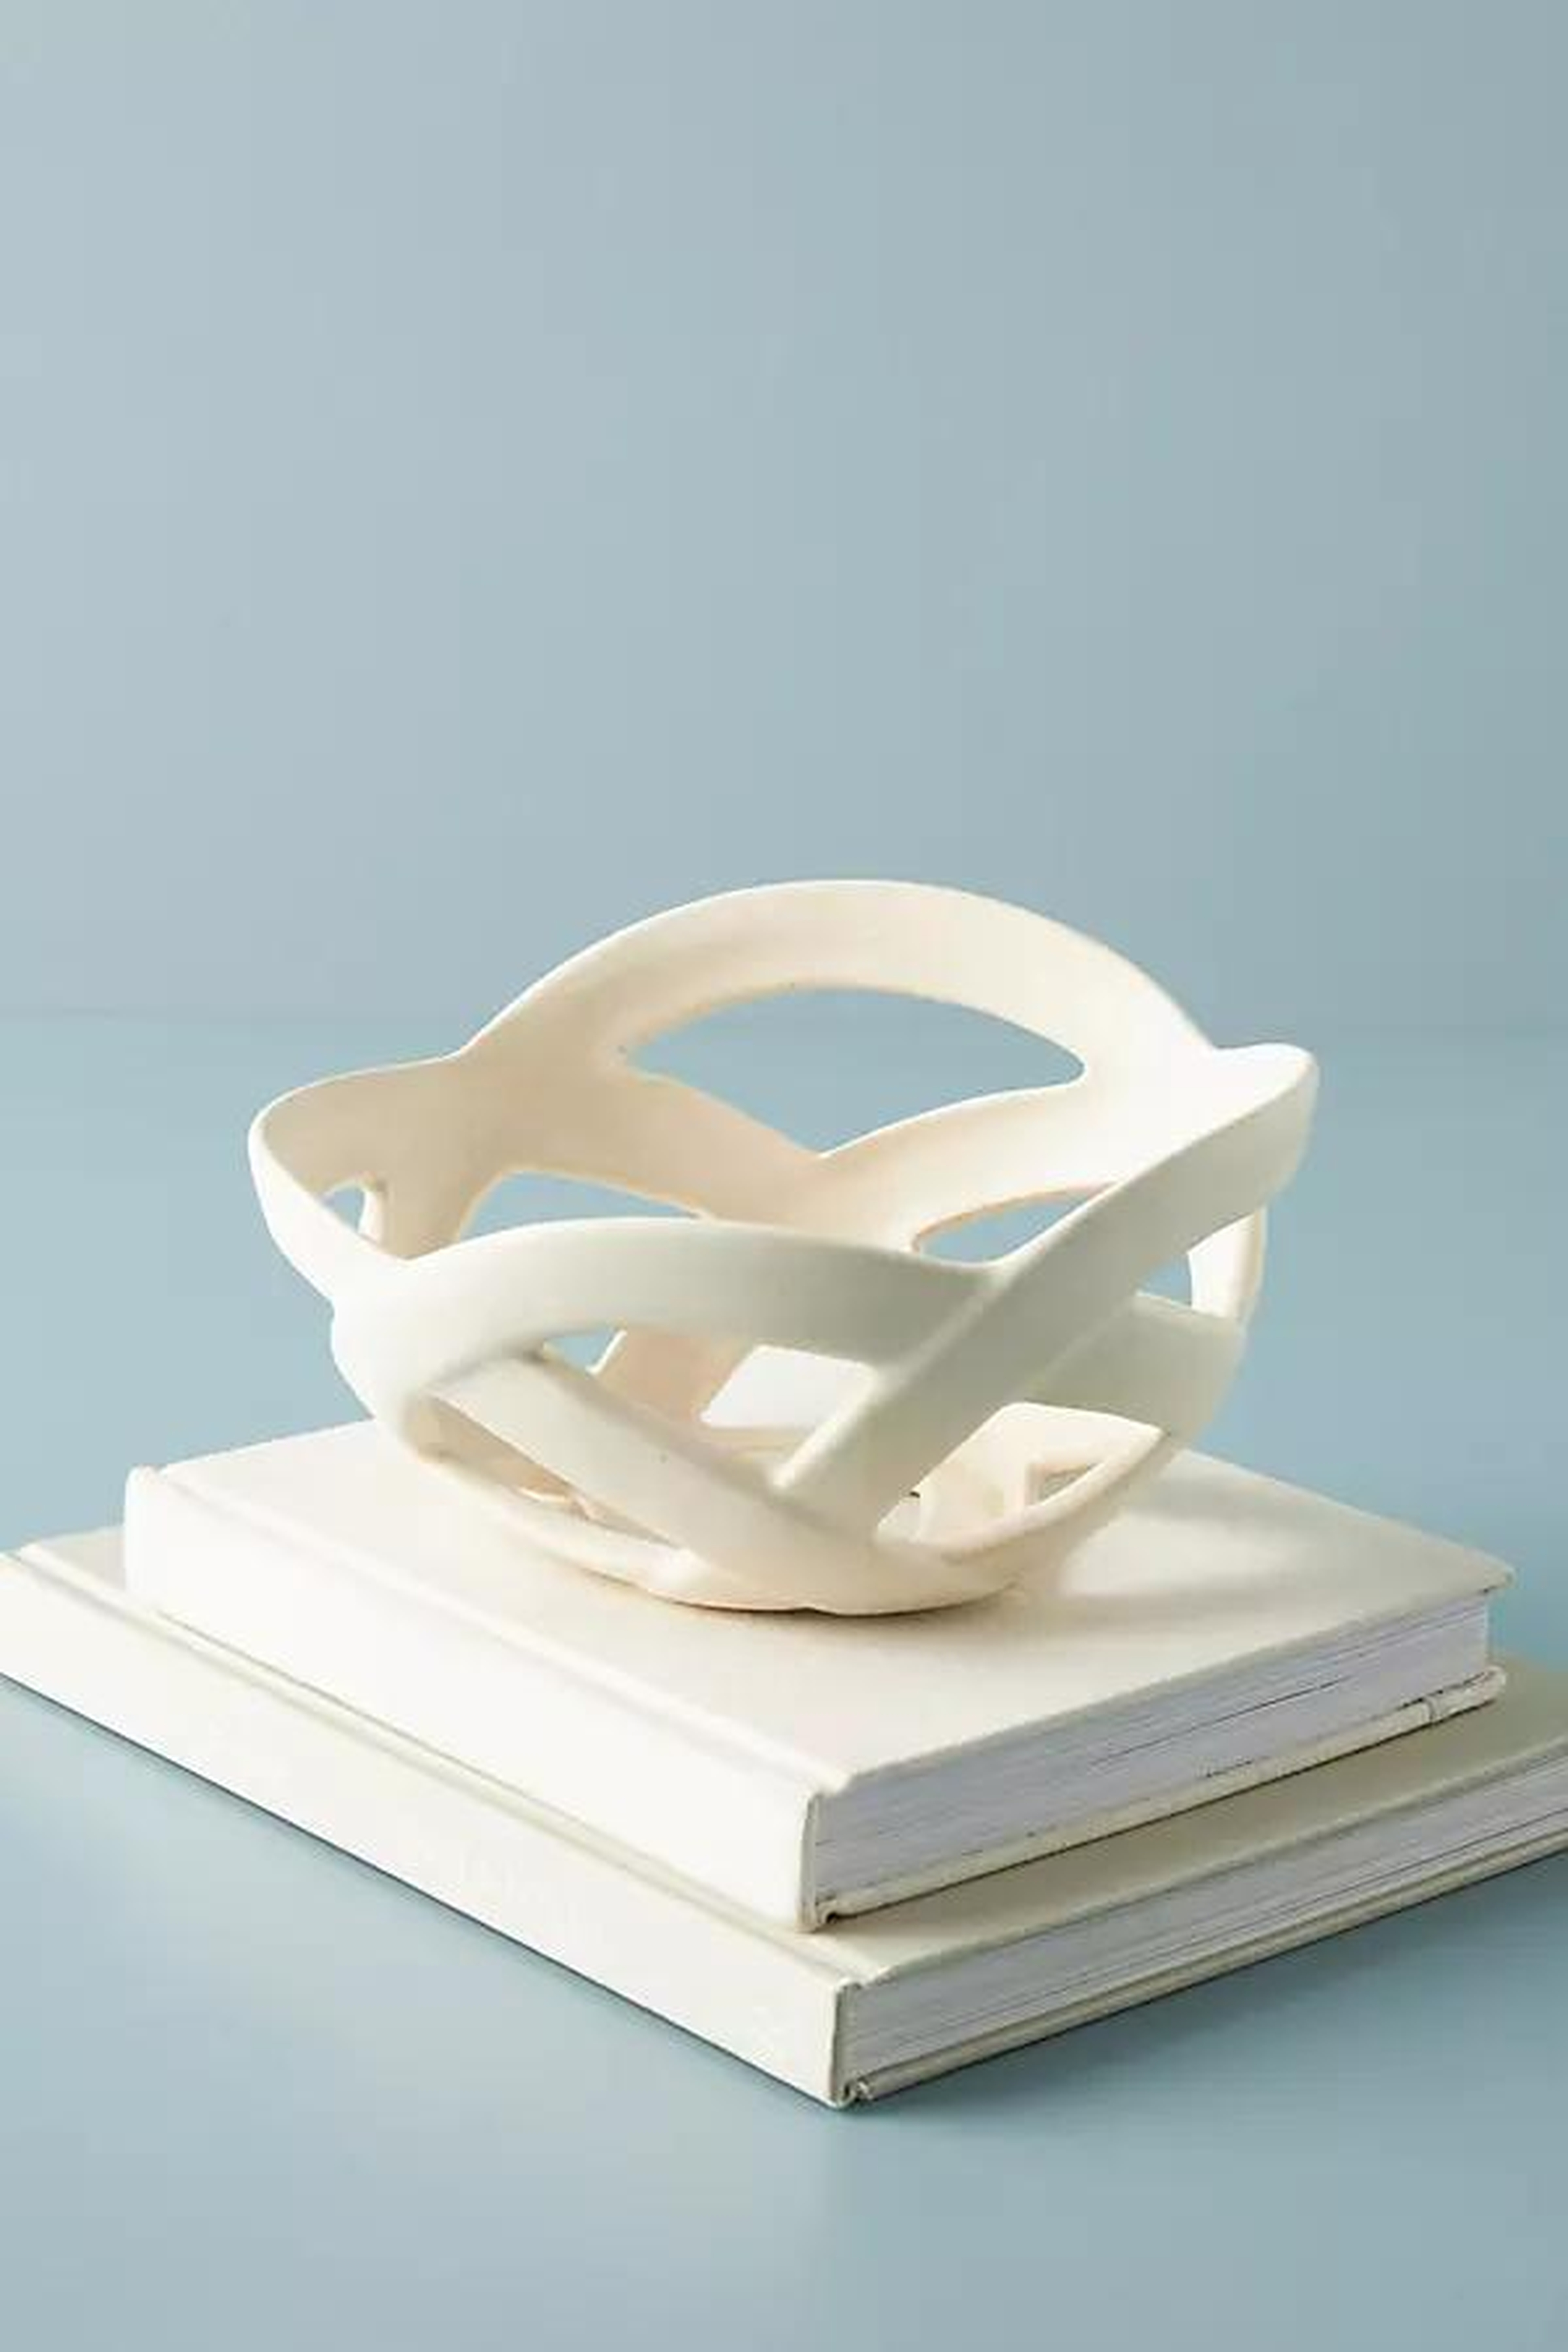 Knotted Decorative Object, White, Medium - Anthropologie